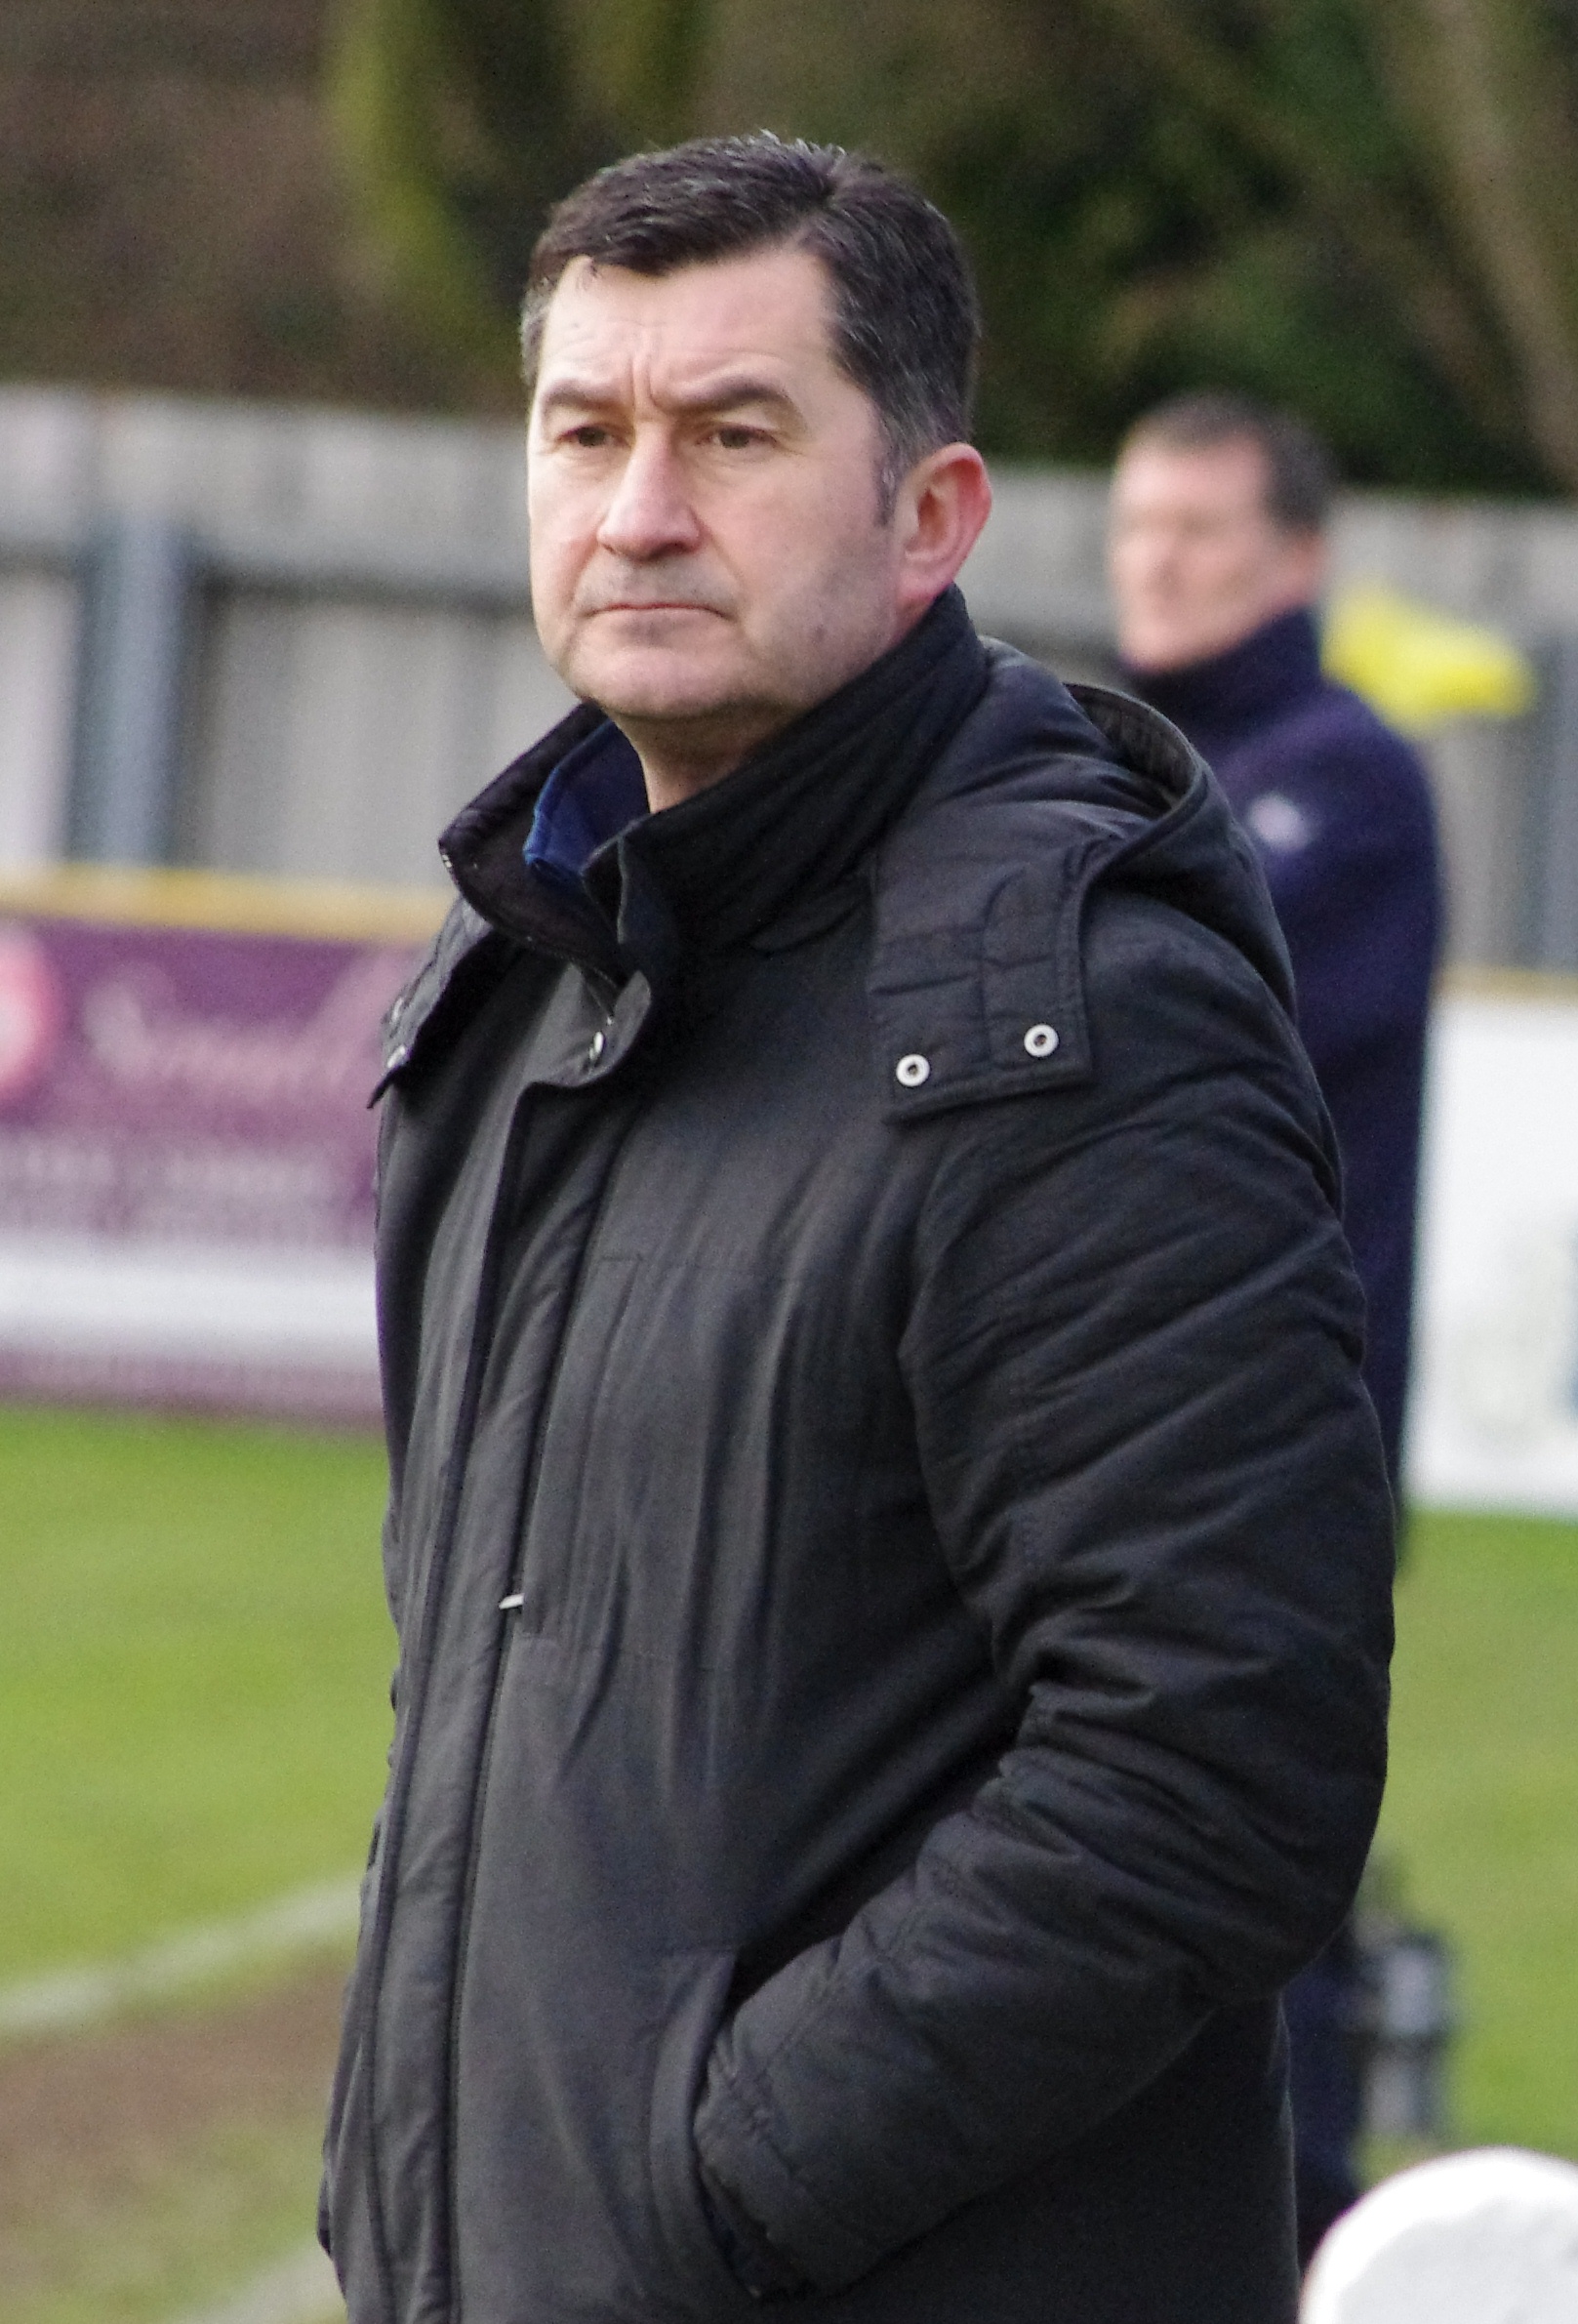 Tadcaster Albion boss Paul Marshall has set a new target of 100 points in their quest for the NCEL Premier Division title